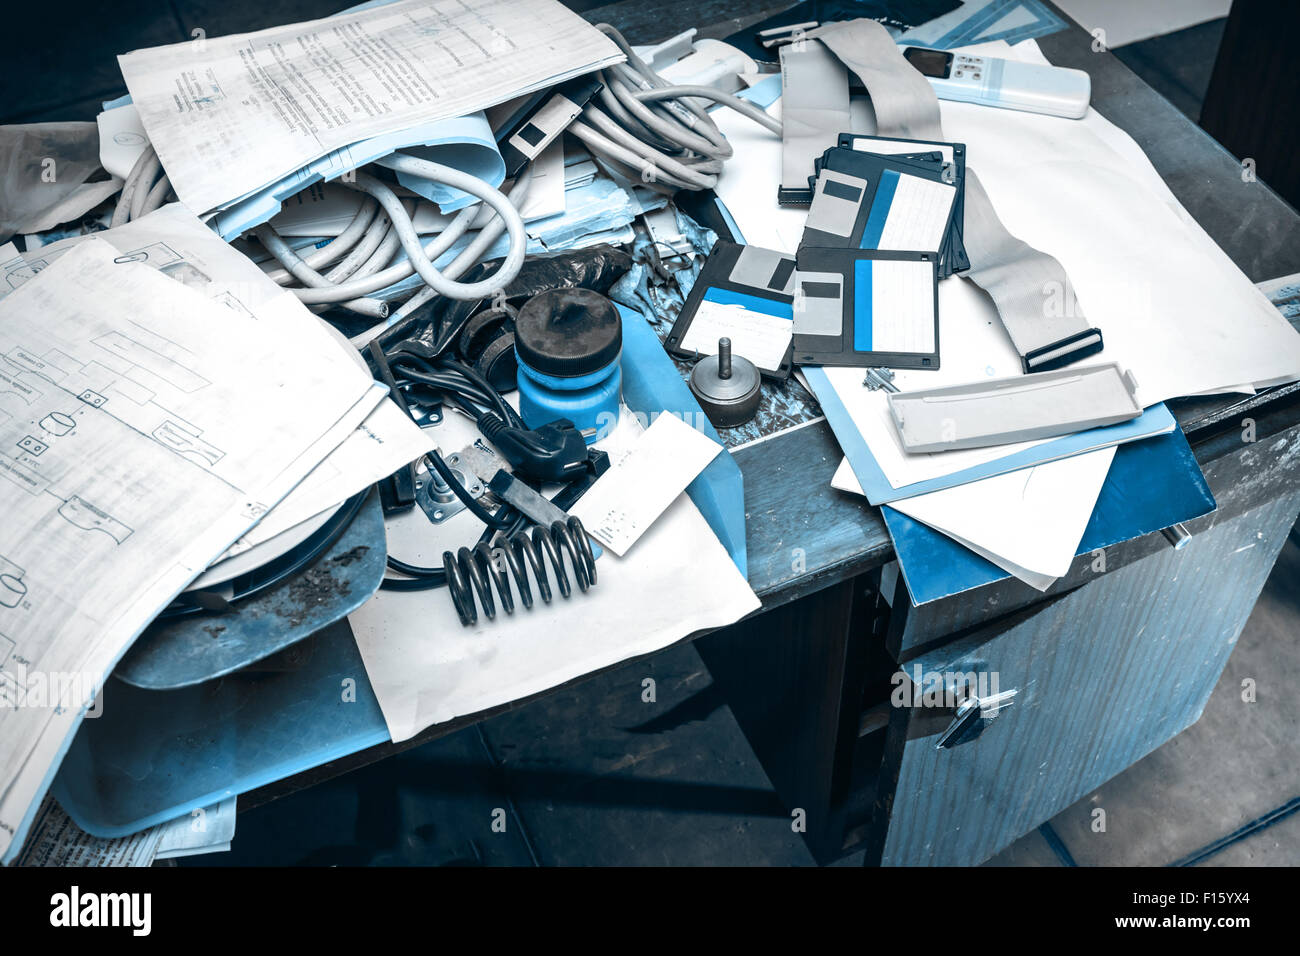 Messy workplace with stack of paper on table Stock Photo